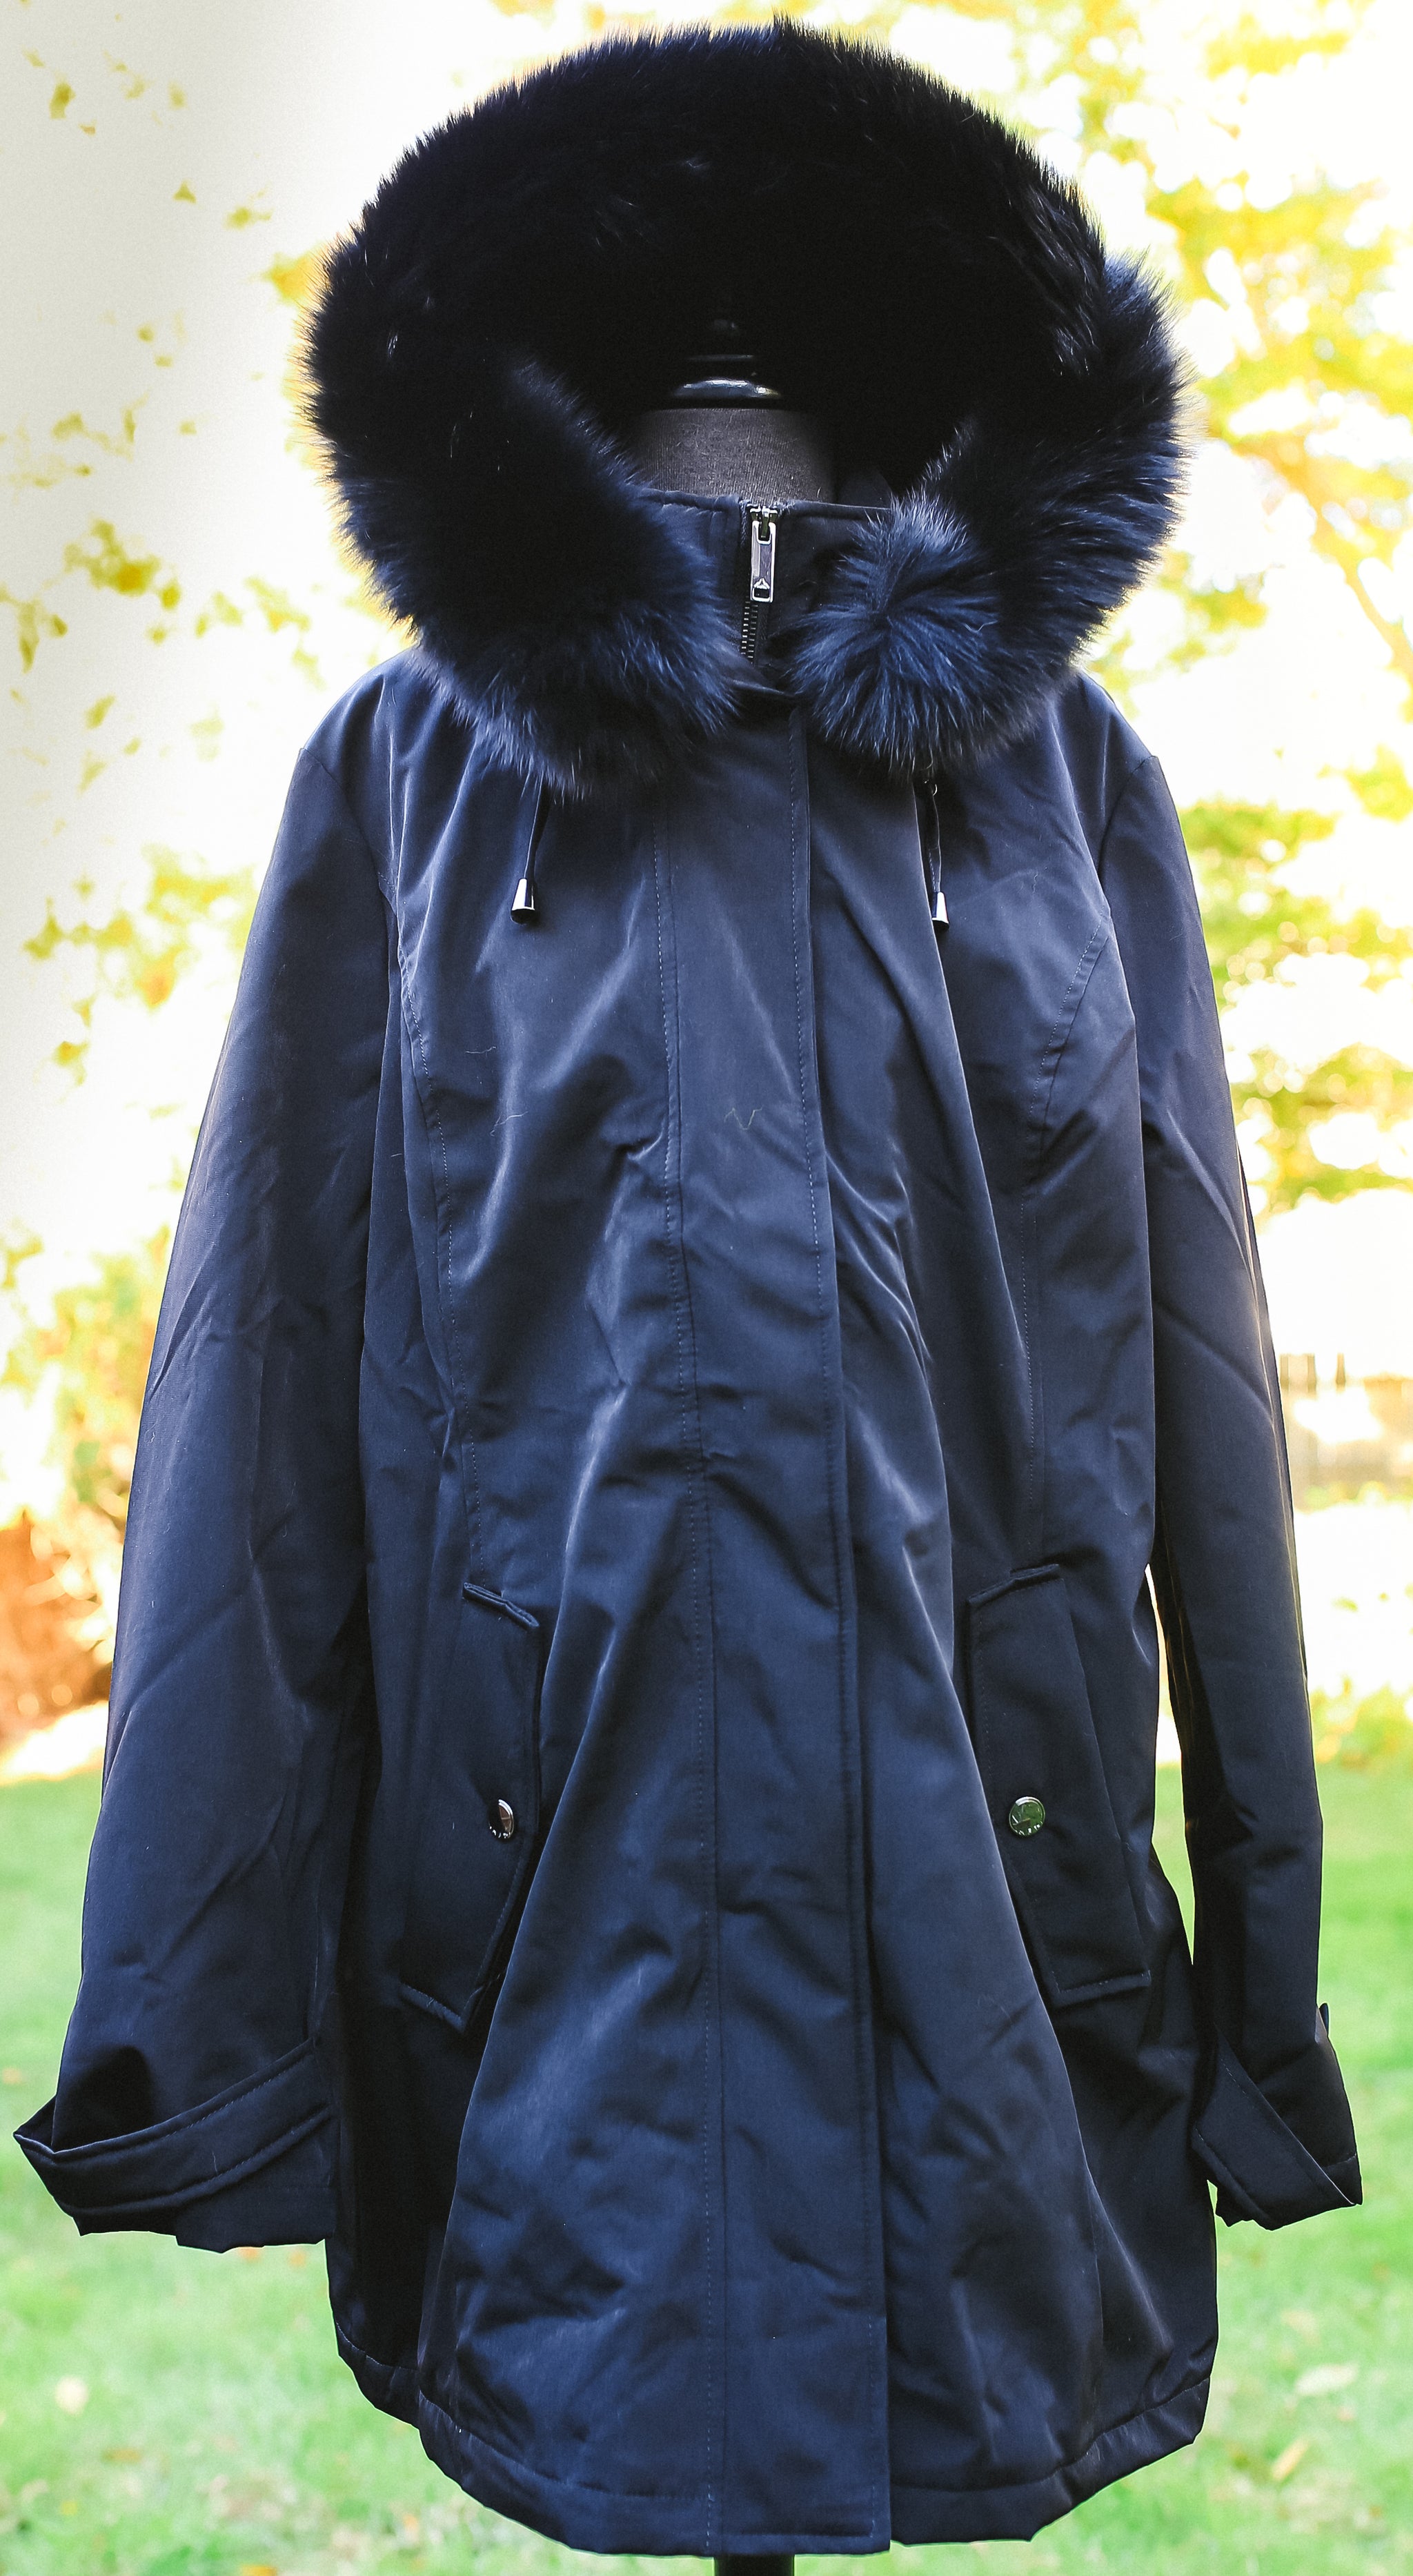 Dimitrios Furs on Long Island, NY Fur, Leather, Shearling, Outerwear